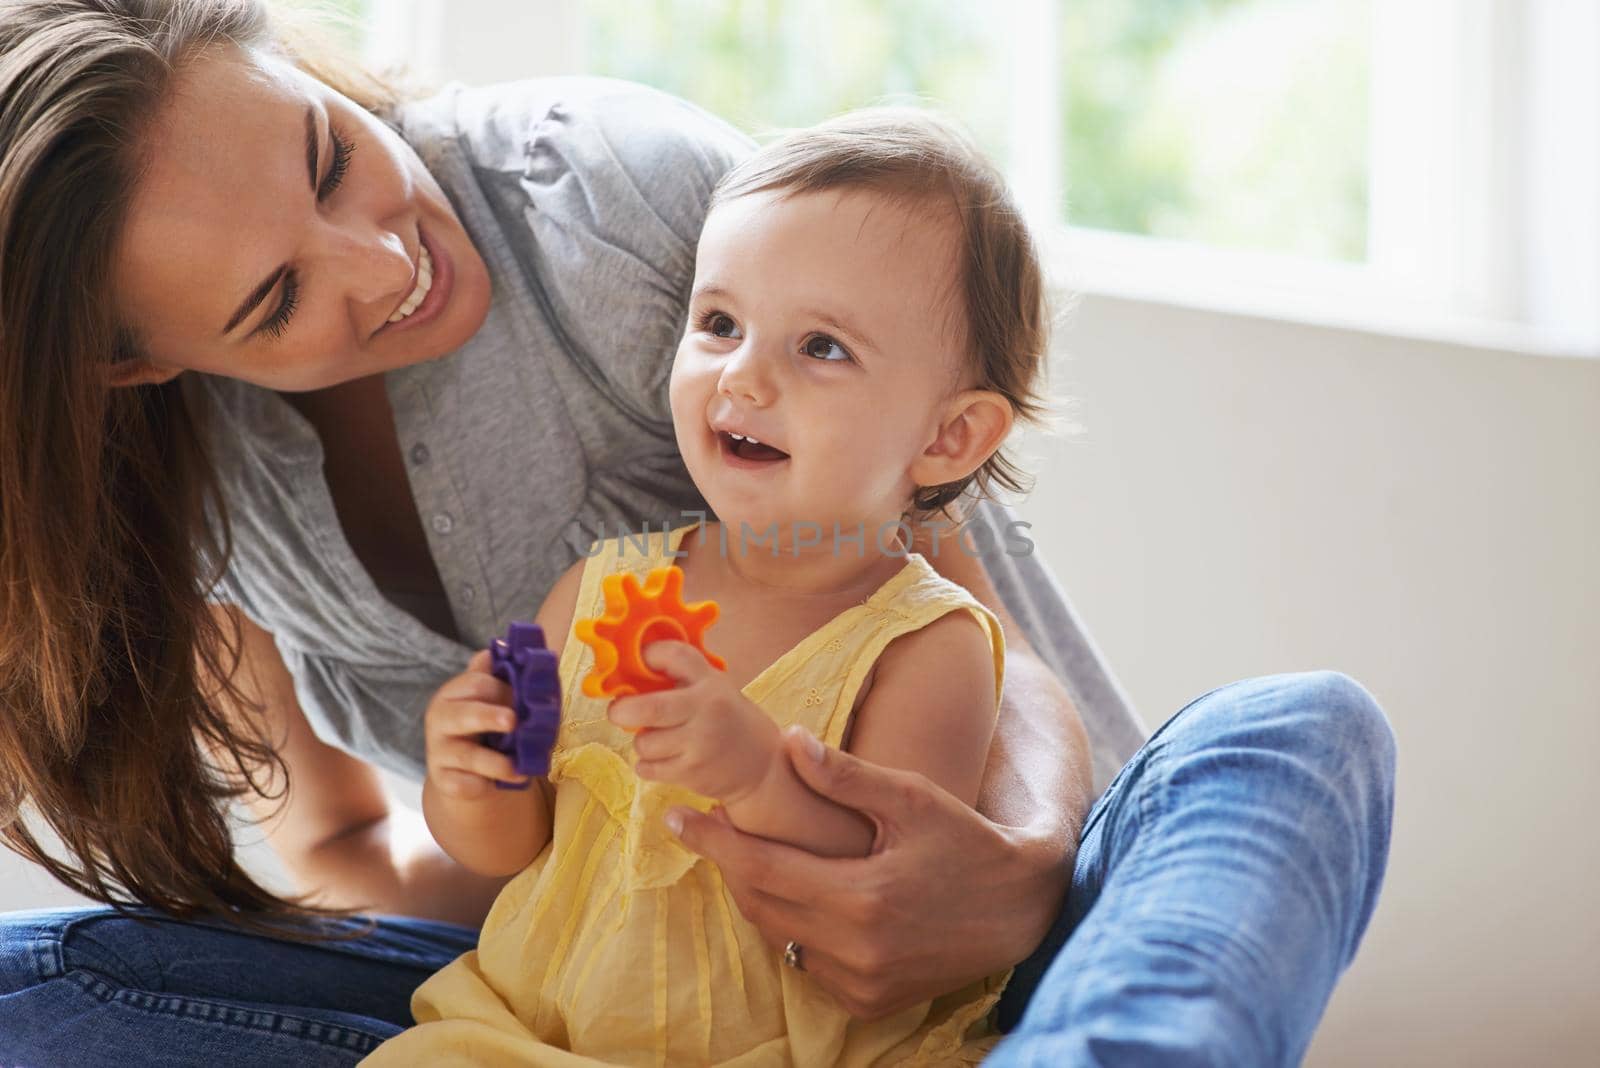 Shot of a cute baby girl sitting on the floor with her mom and playing with toys.